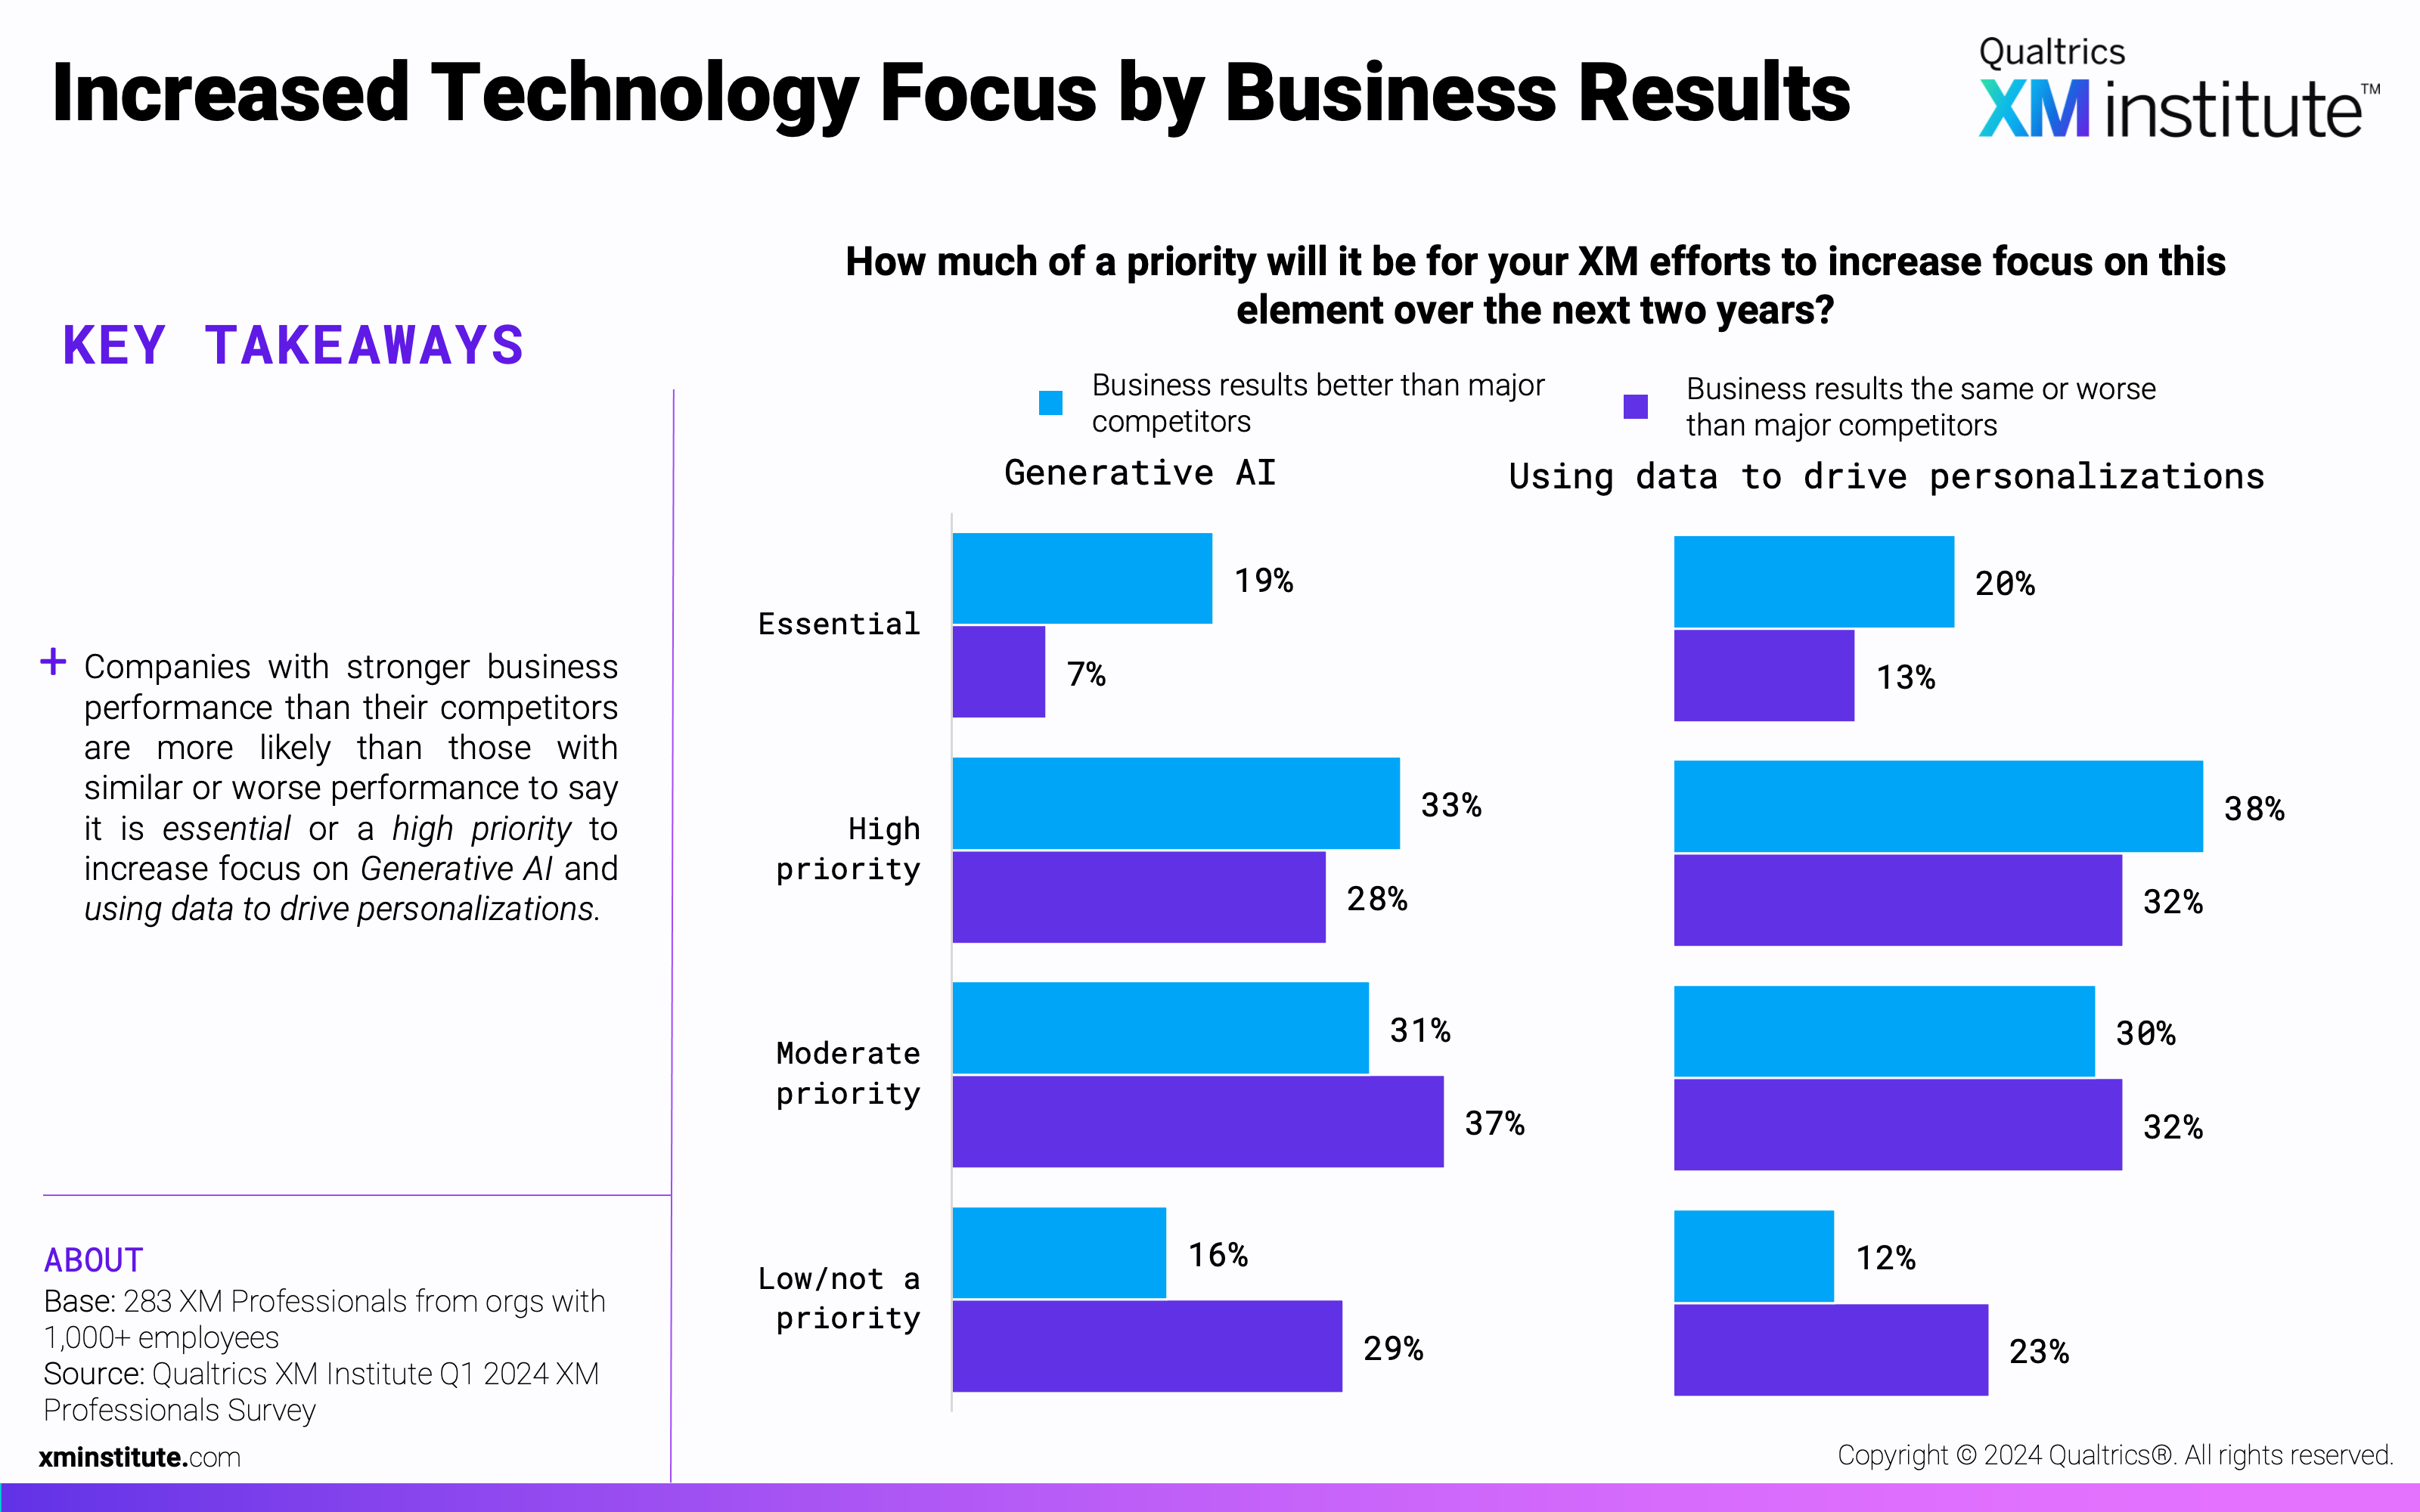 This chart shows how much respondents' organizations will prioritize increased focus on generative AI and data for personalizations according to their business results. 